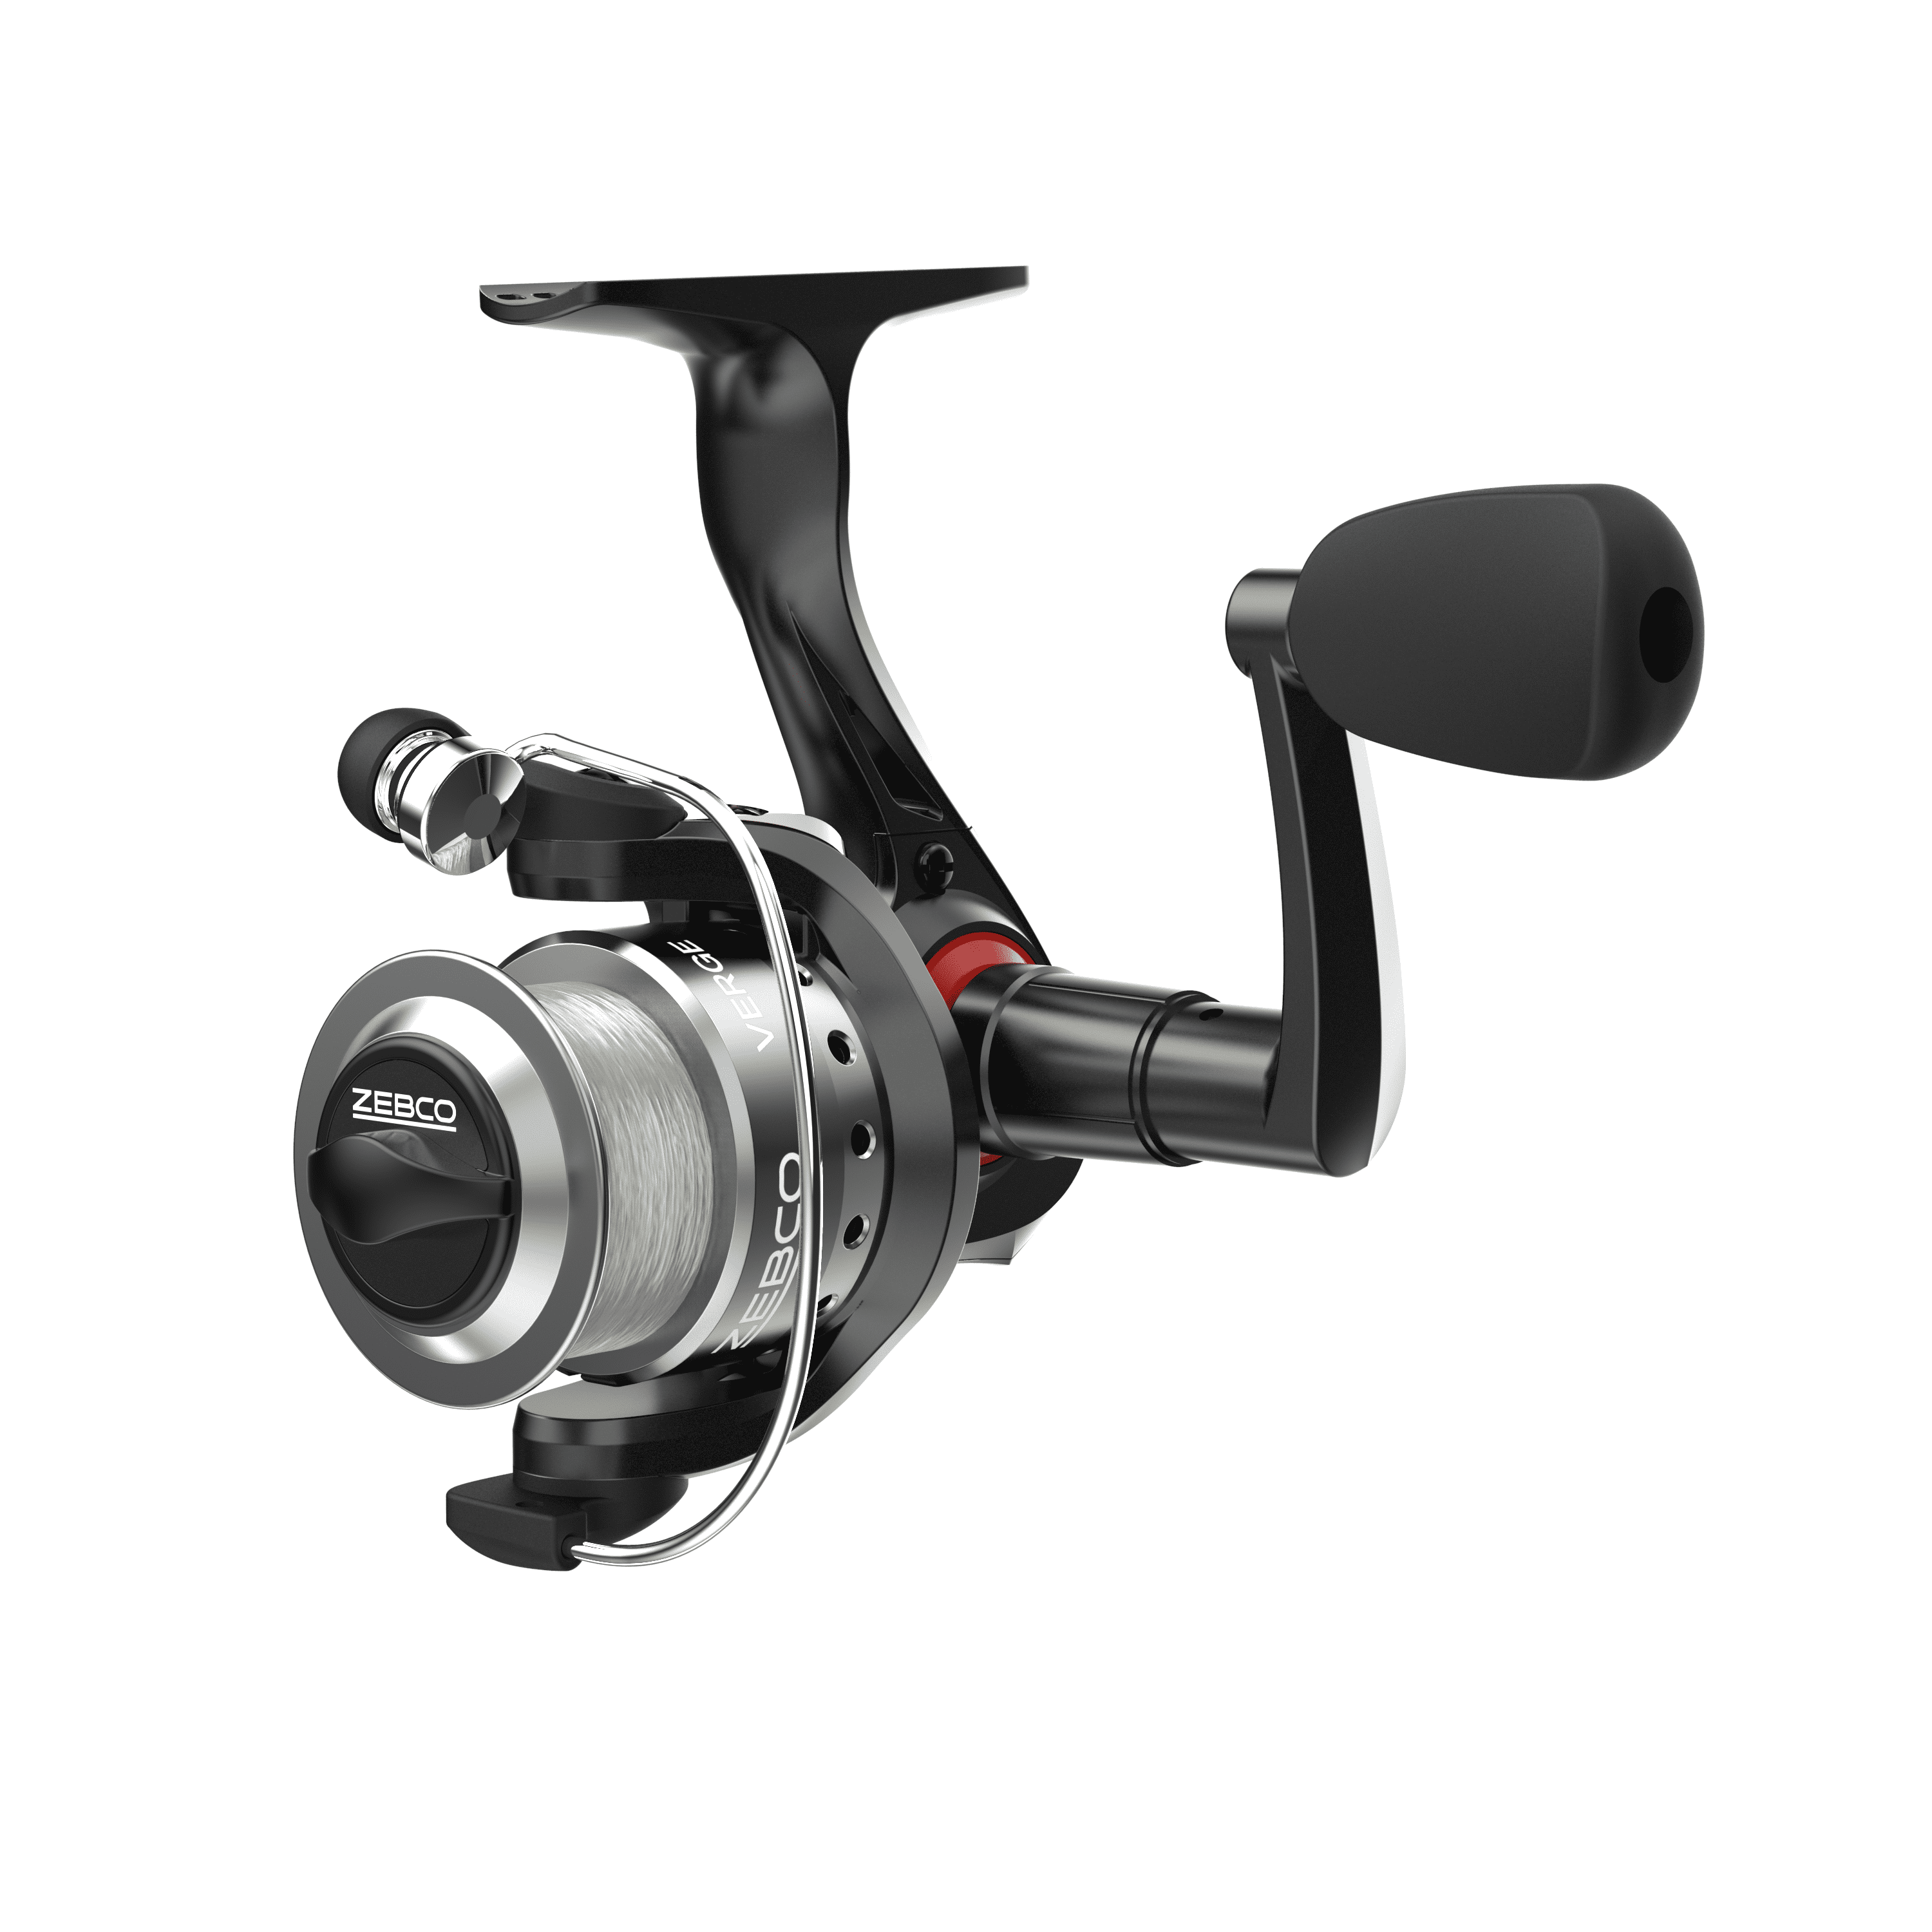 Zebco Verge Spinning Fishing Reel, Size 60 Reel, Changeable Right